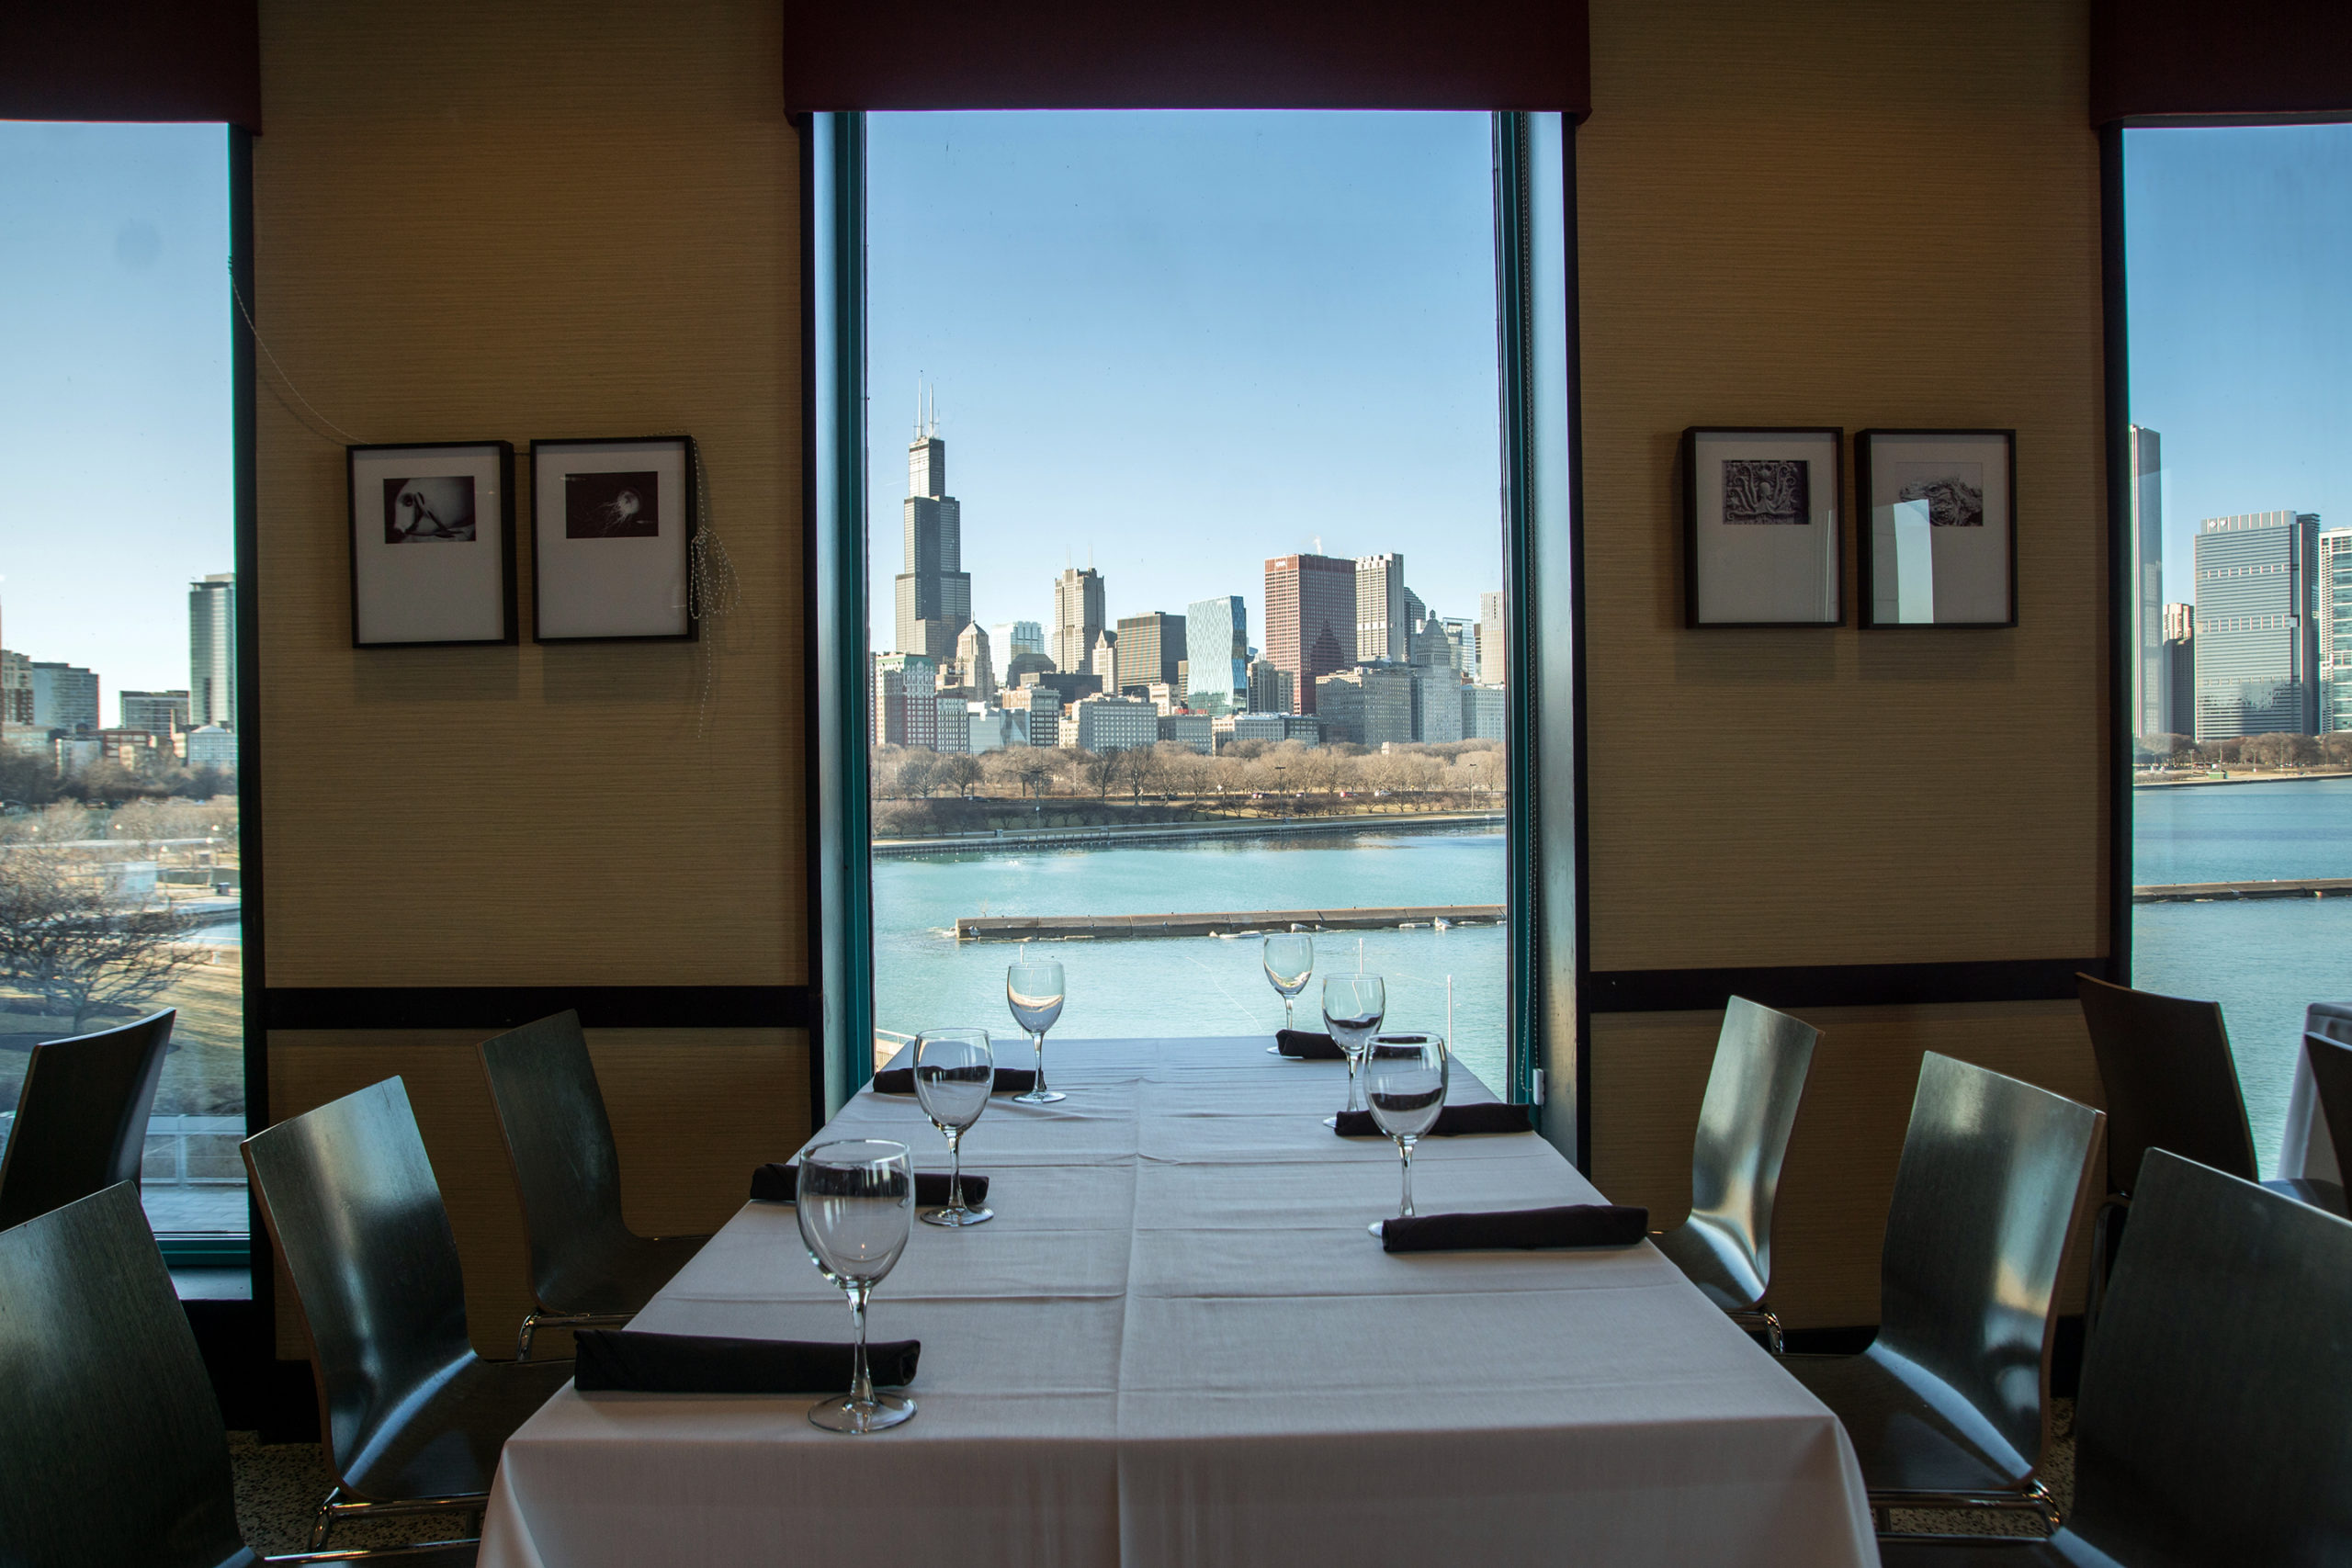 Special Event set up at Shedd Aquarium with view of Chicago